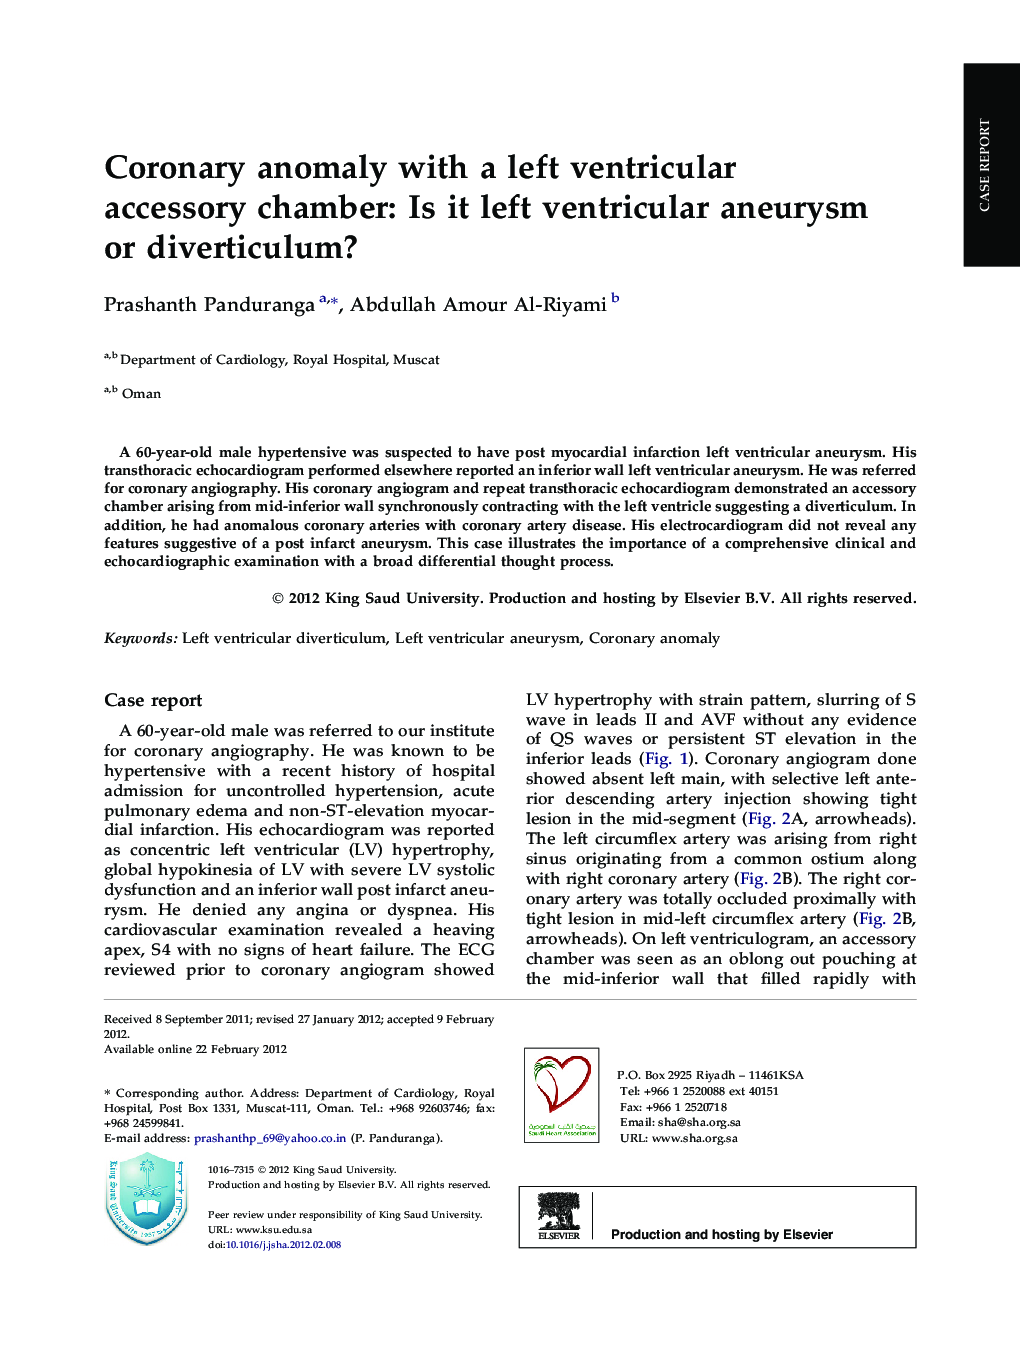 Coronary anomaly with a left ventricular accessory chamber: Is it left ventricular aneurysm or diverticulum? 